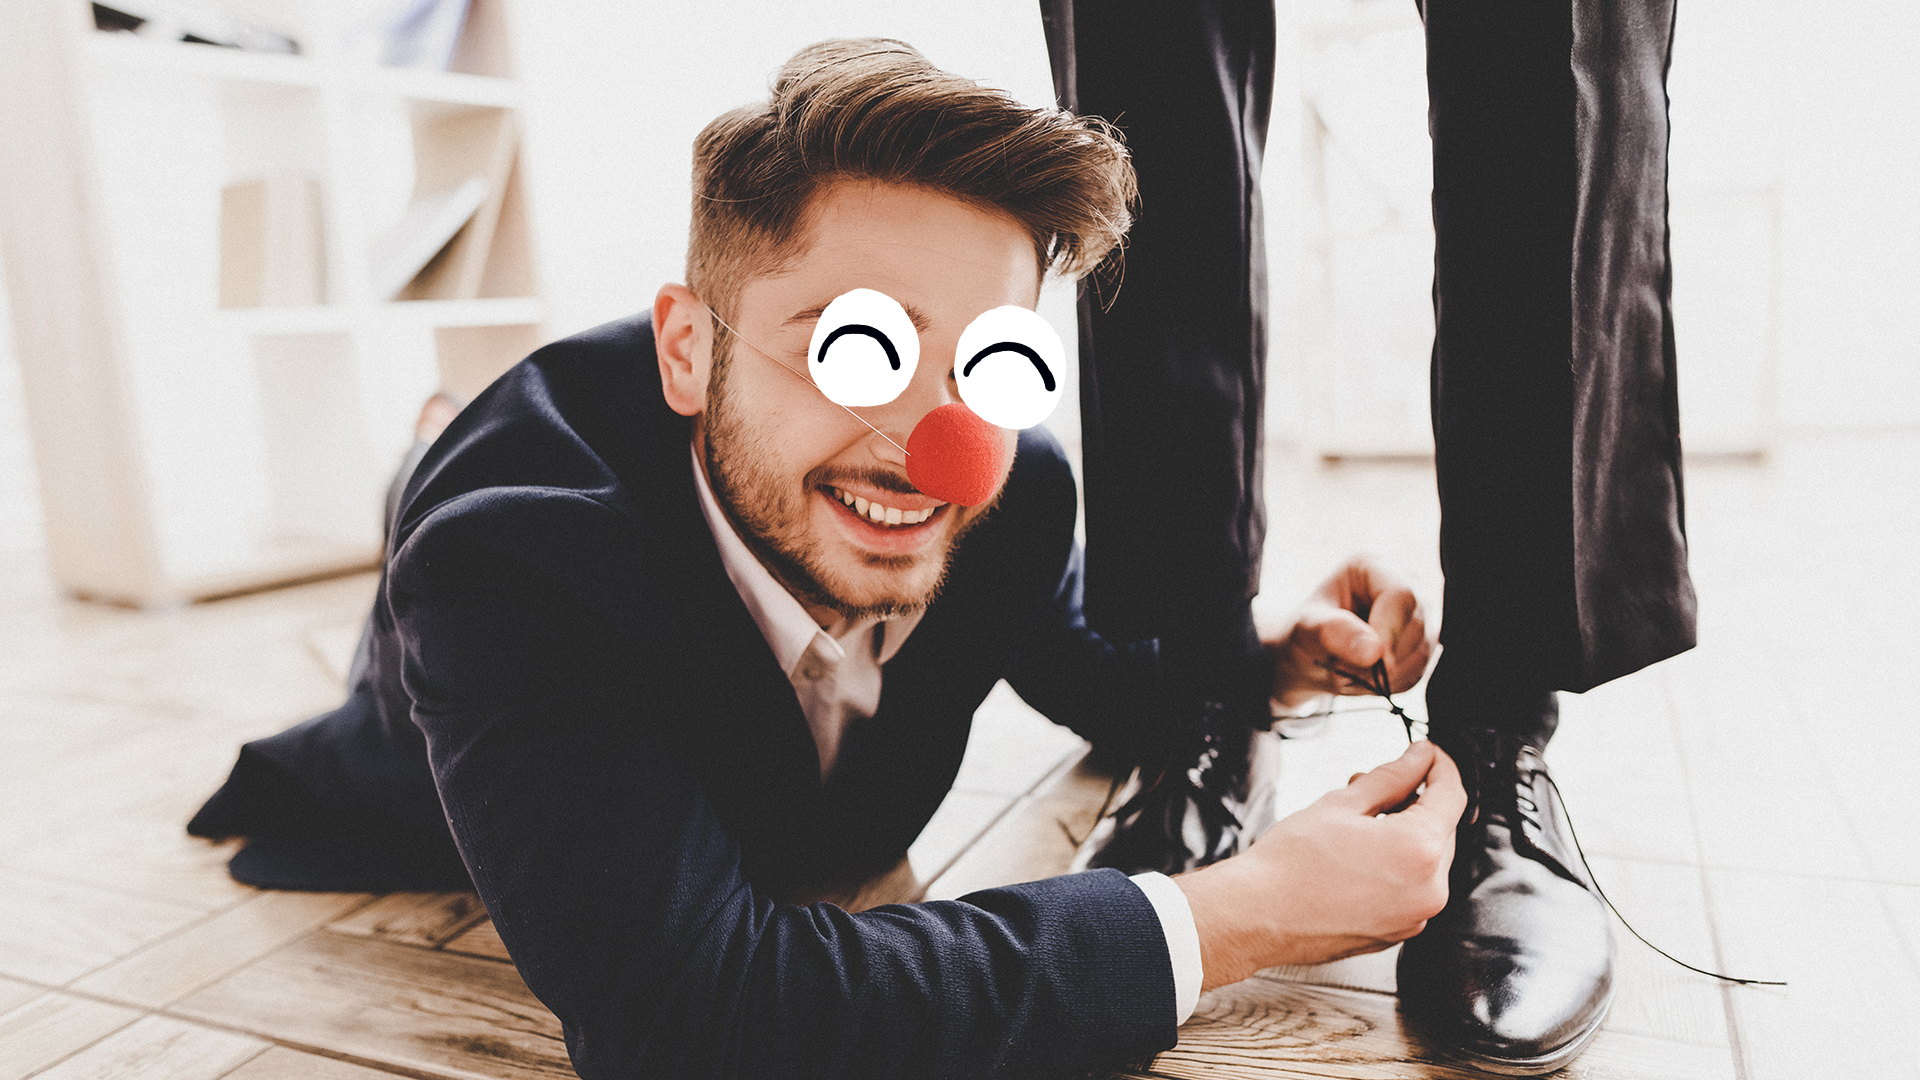 A man with a clown's nose tying their friend's shoes together for a dangerous prank